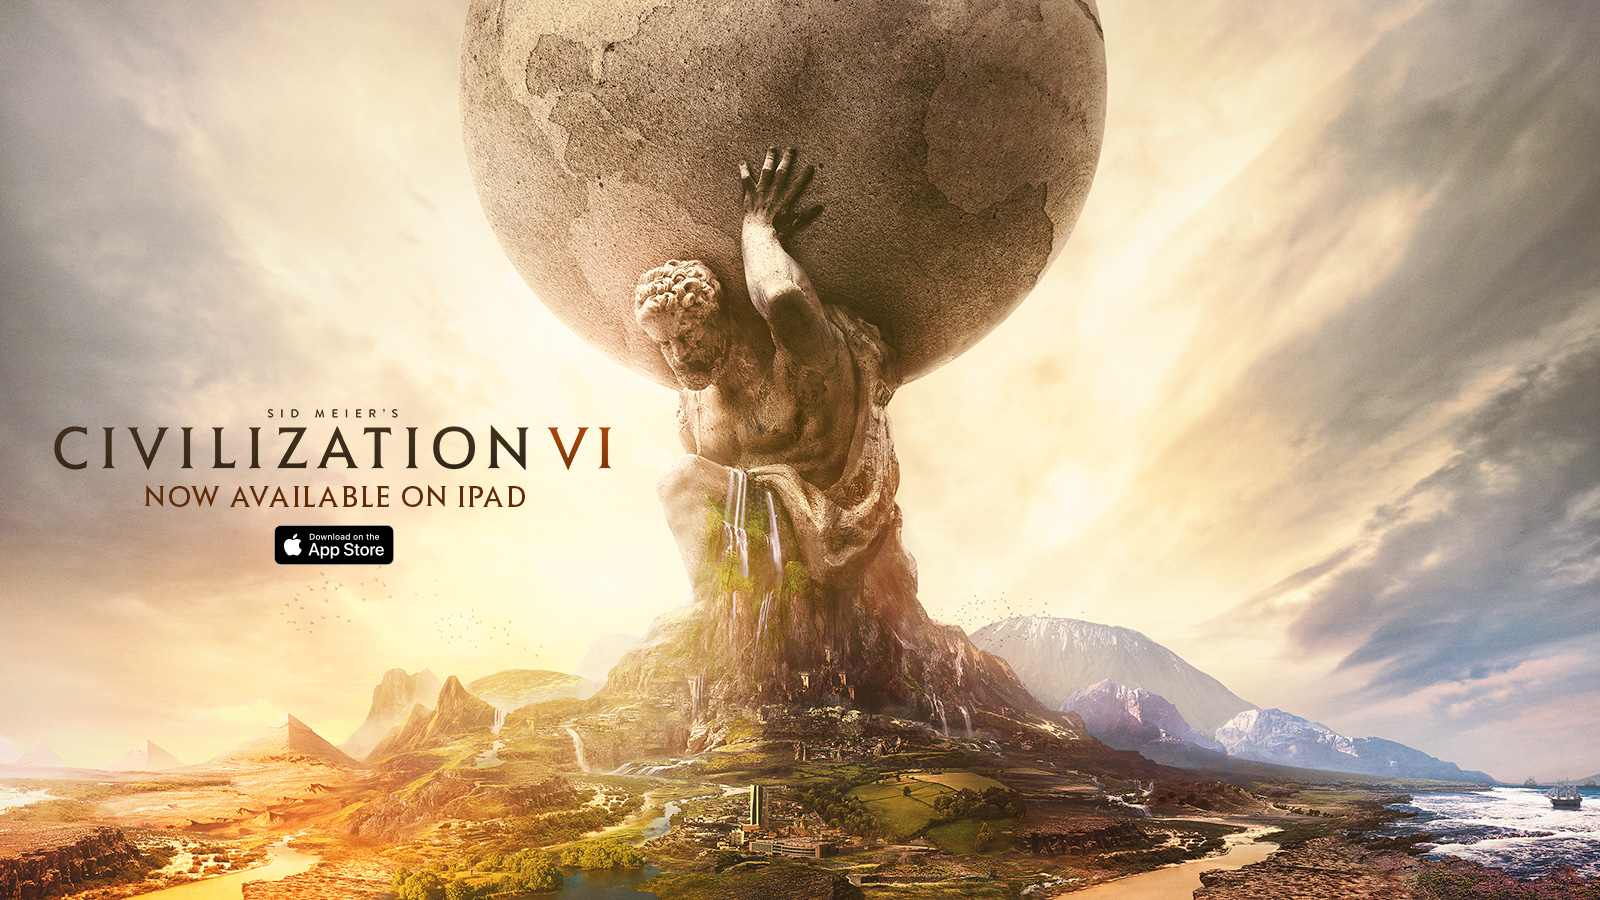 ‘Sid Meier's Civilization VI’ Just Released for iPad and You Can Try It out for Free Right Now